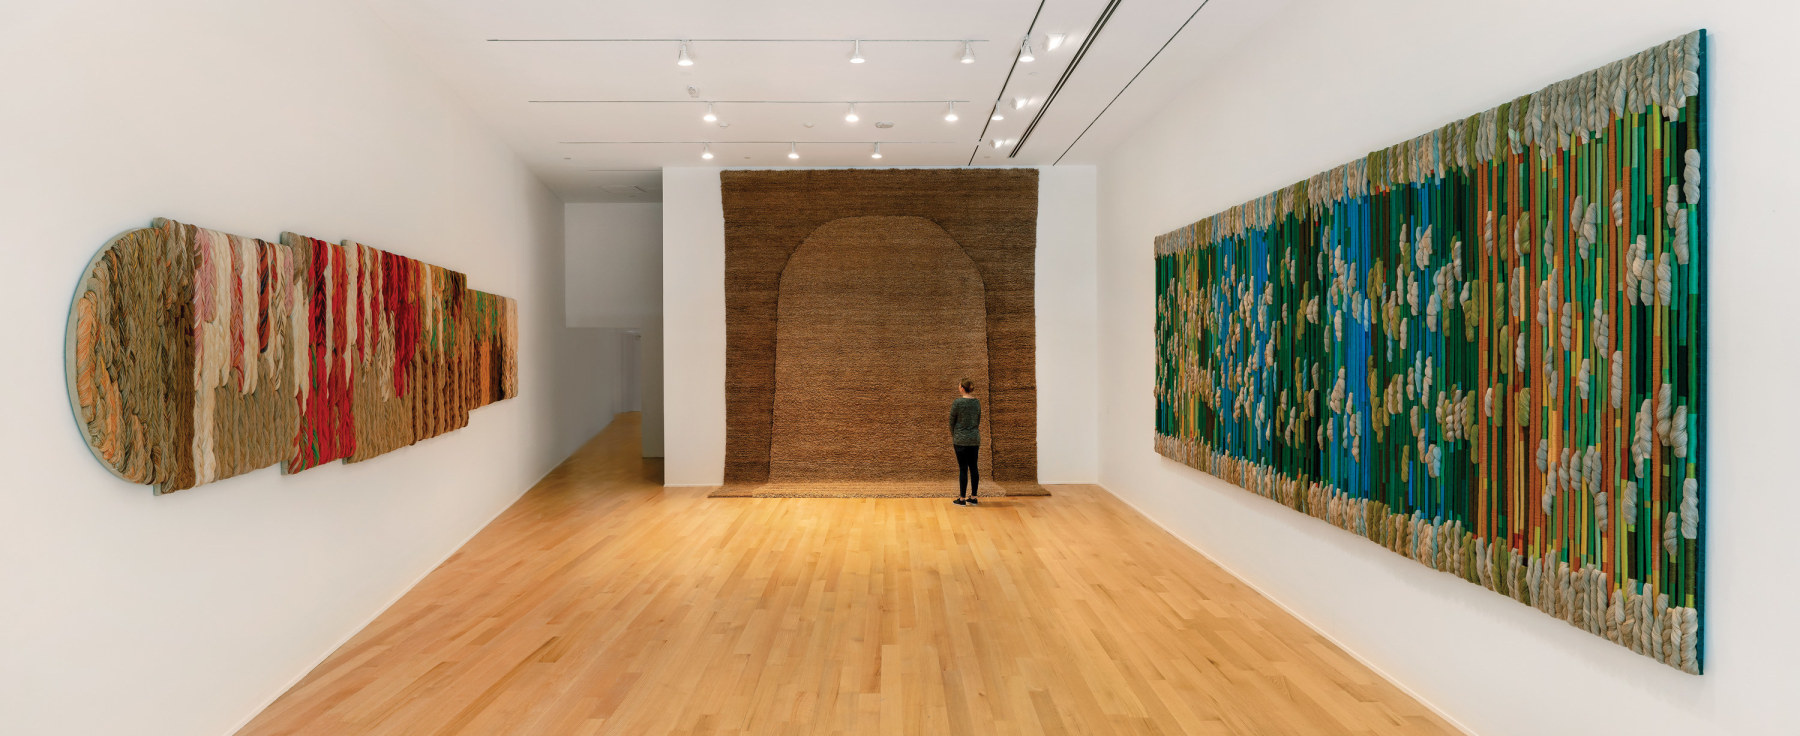 Installation view of Sheila Hicks: Campo Abierto (Open Field), April 13 - September 29, 2019